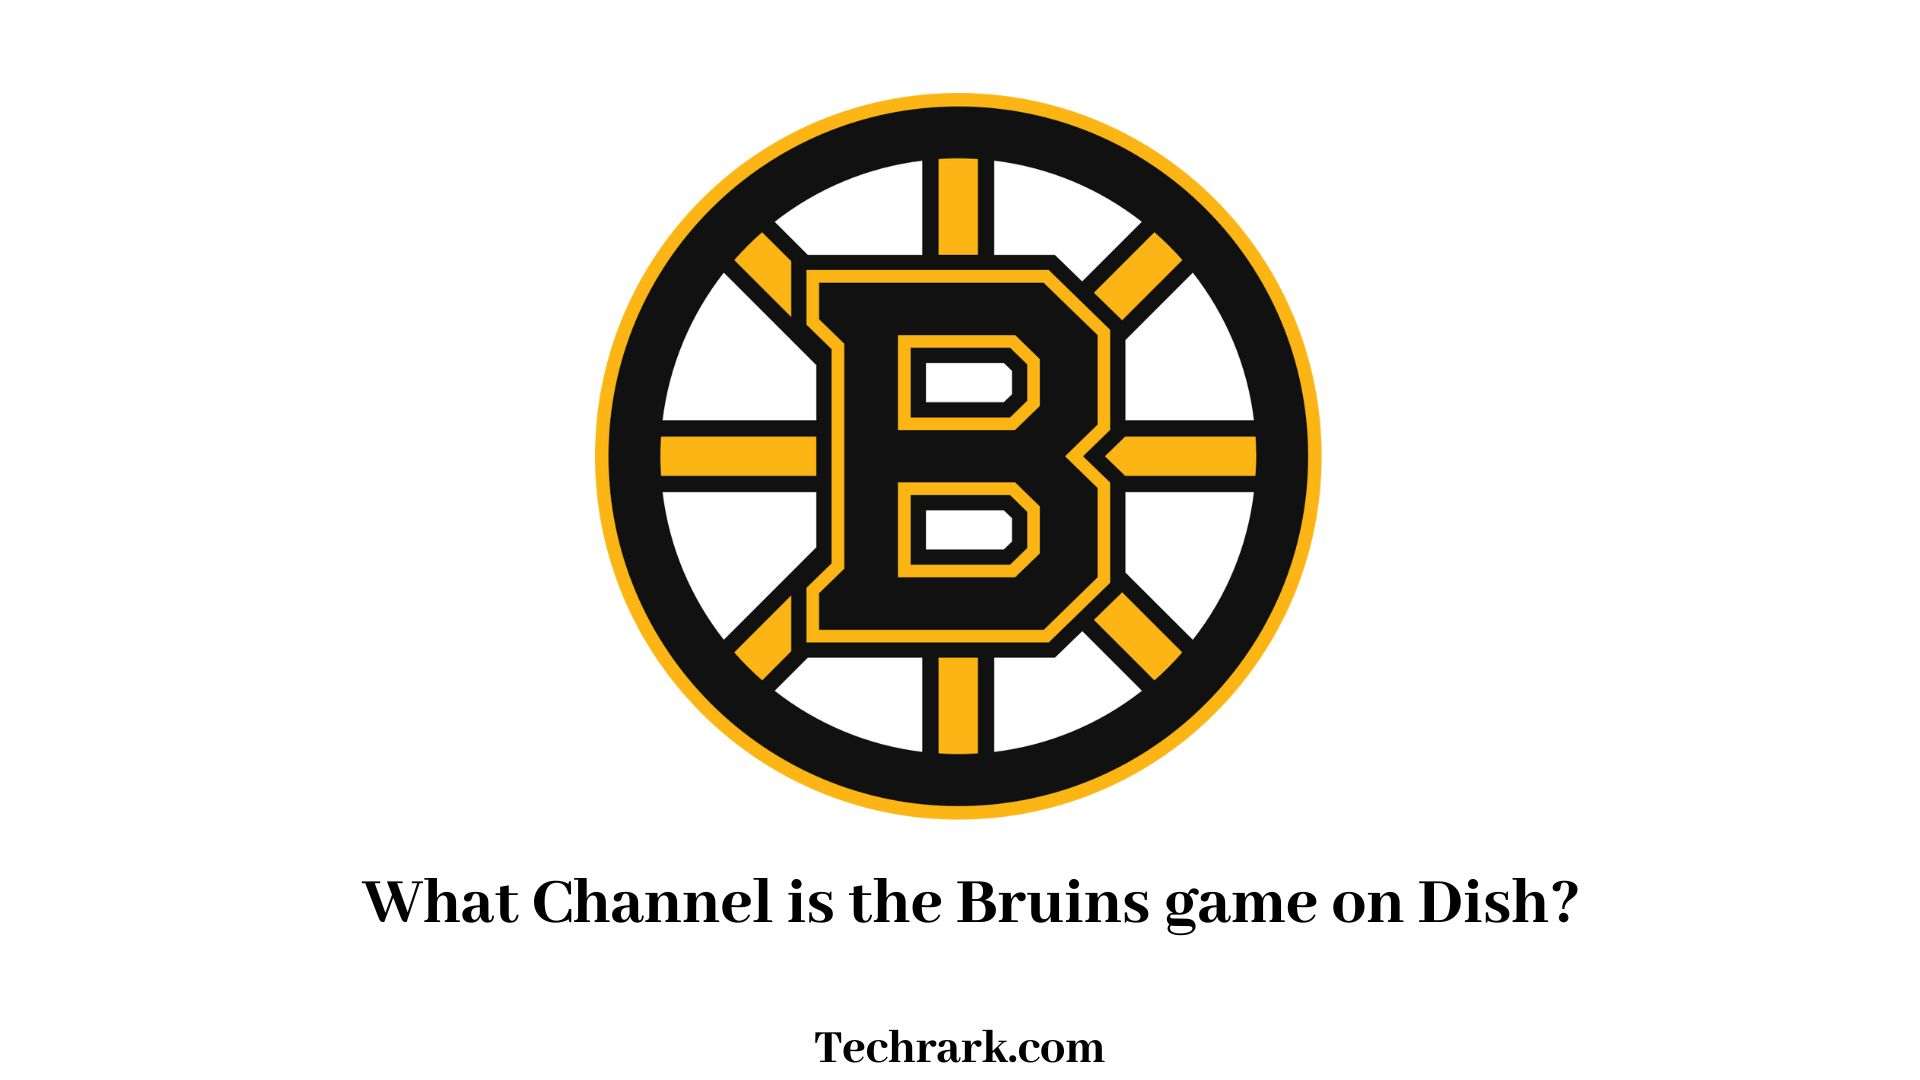 What Channel is the Bruins game on Dish